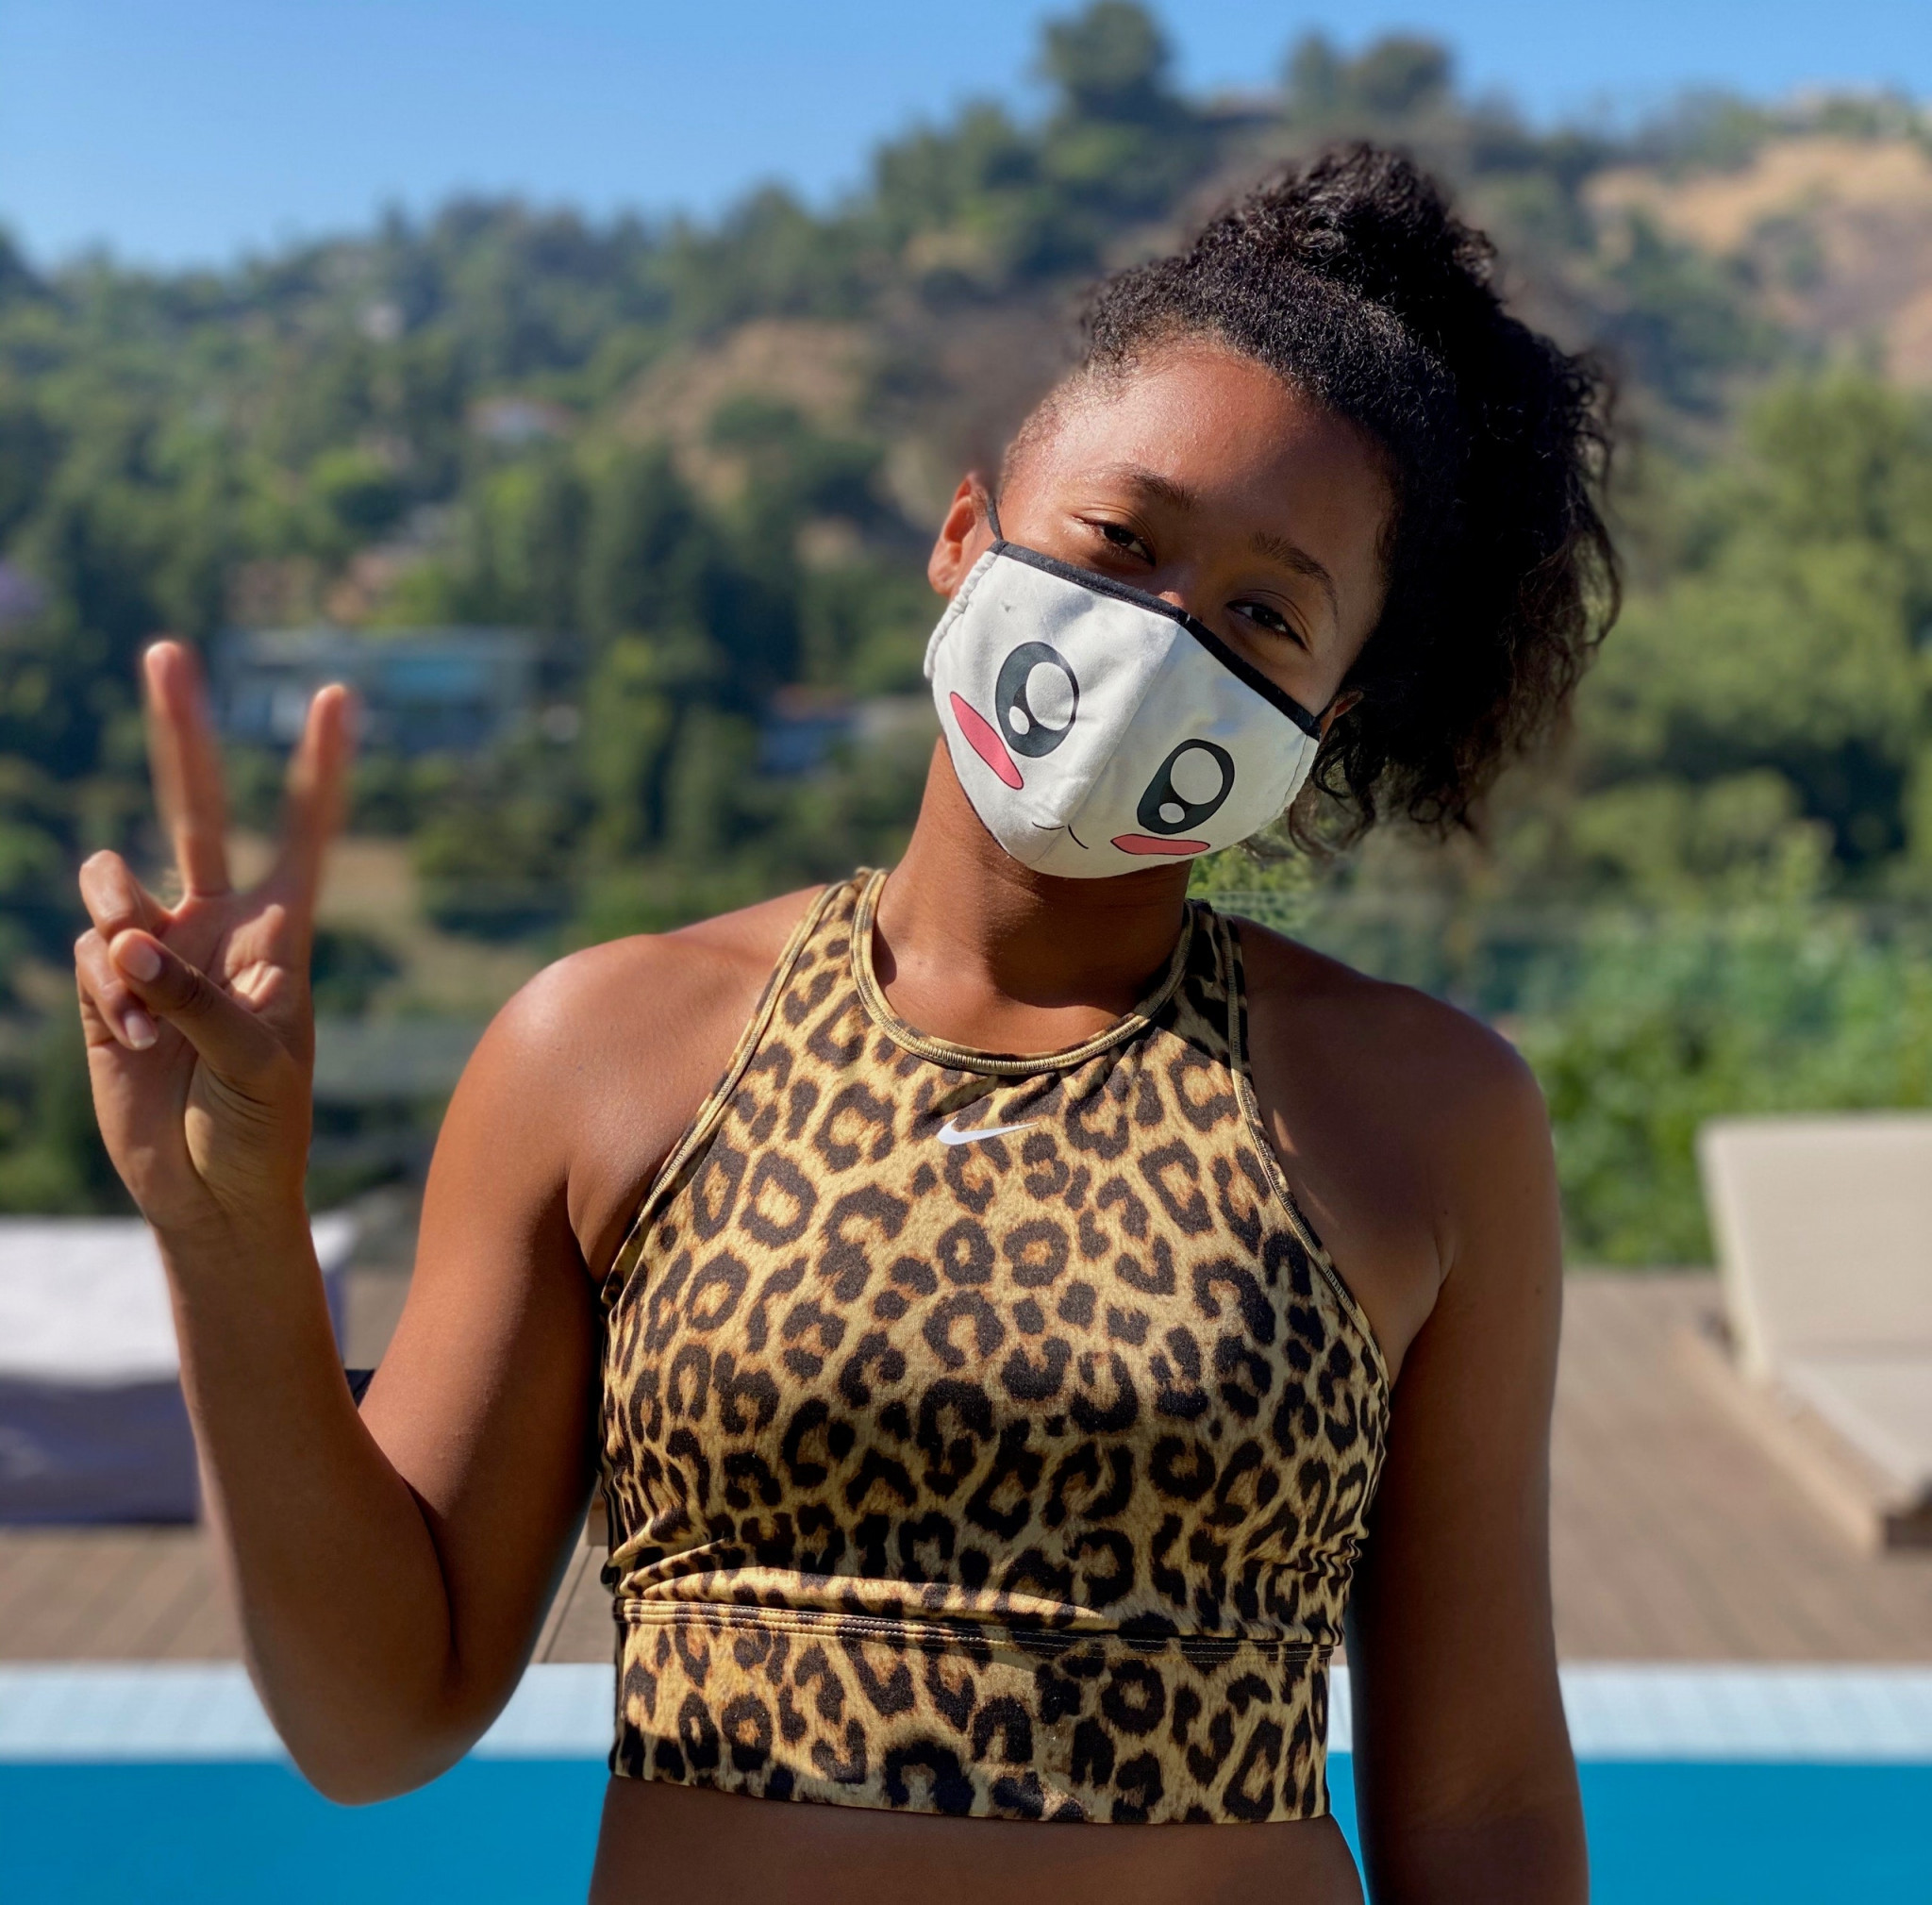 Two-time Grand Slam champion Naomi Osaka has designed a face mask to be worn during the COVID-19 crisis to help raise money for under-privileged youngsters in Japan ©Vogue